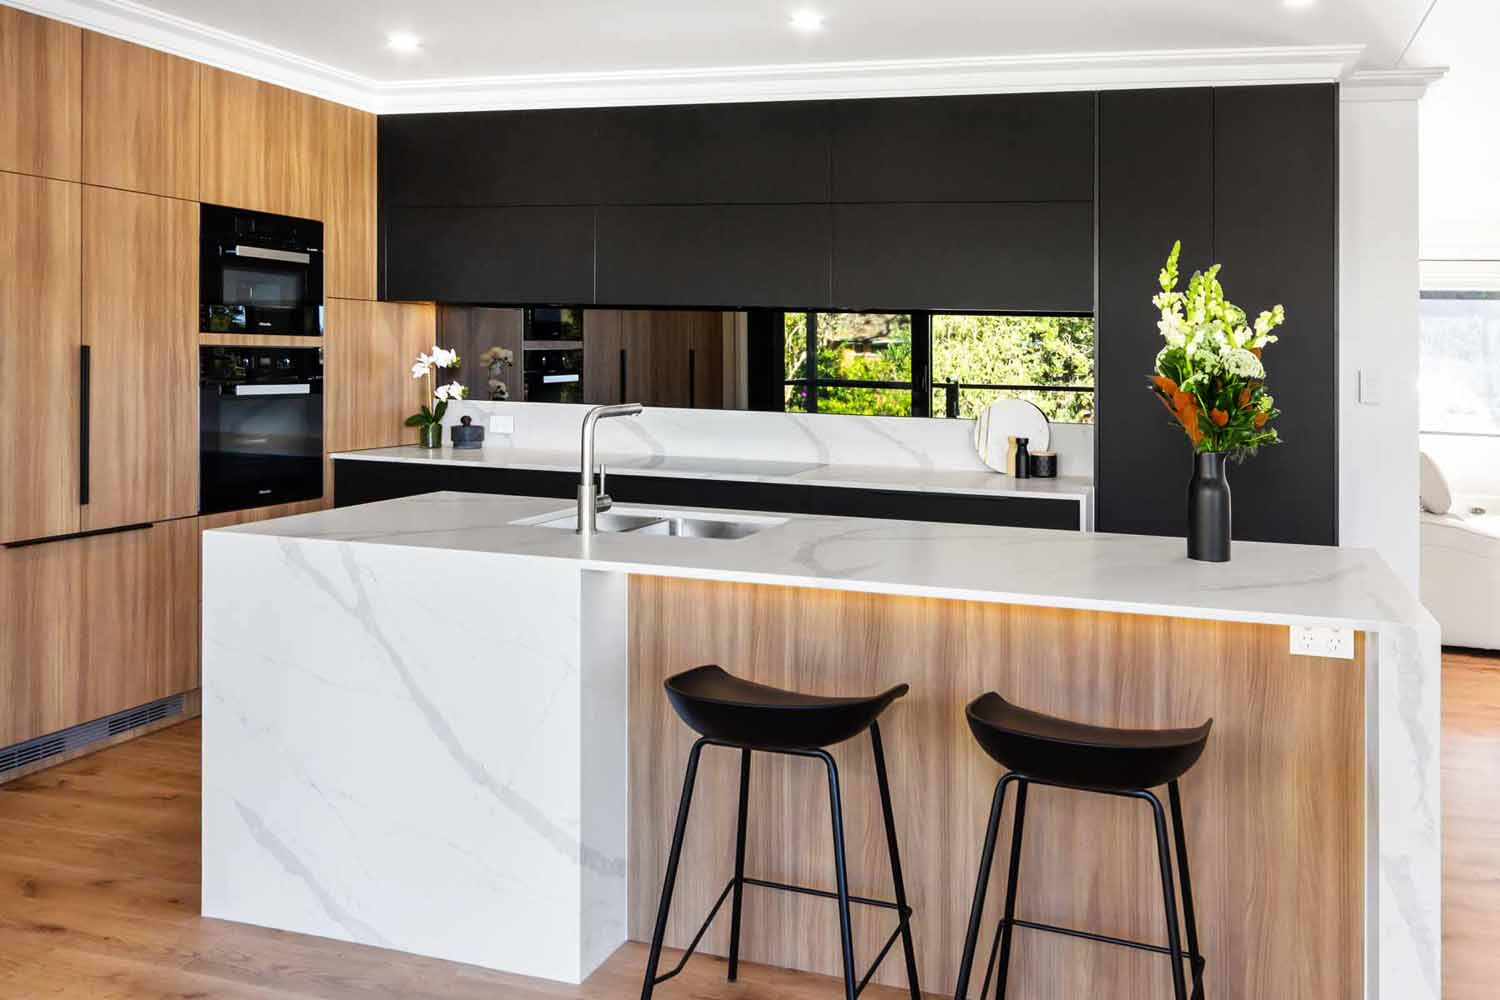 Kitchen Island - The Complete Guide to Designing a Modern Kitchen